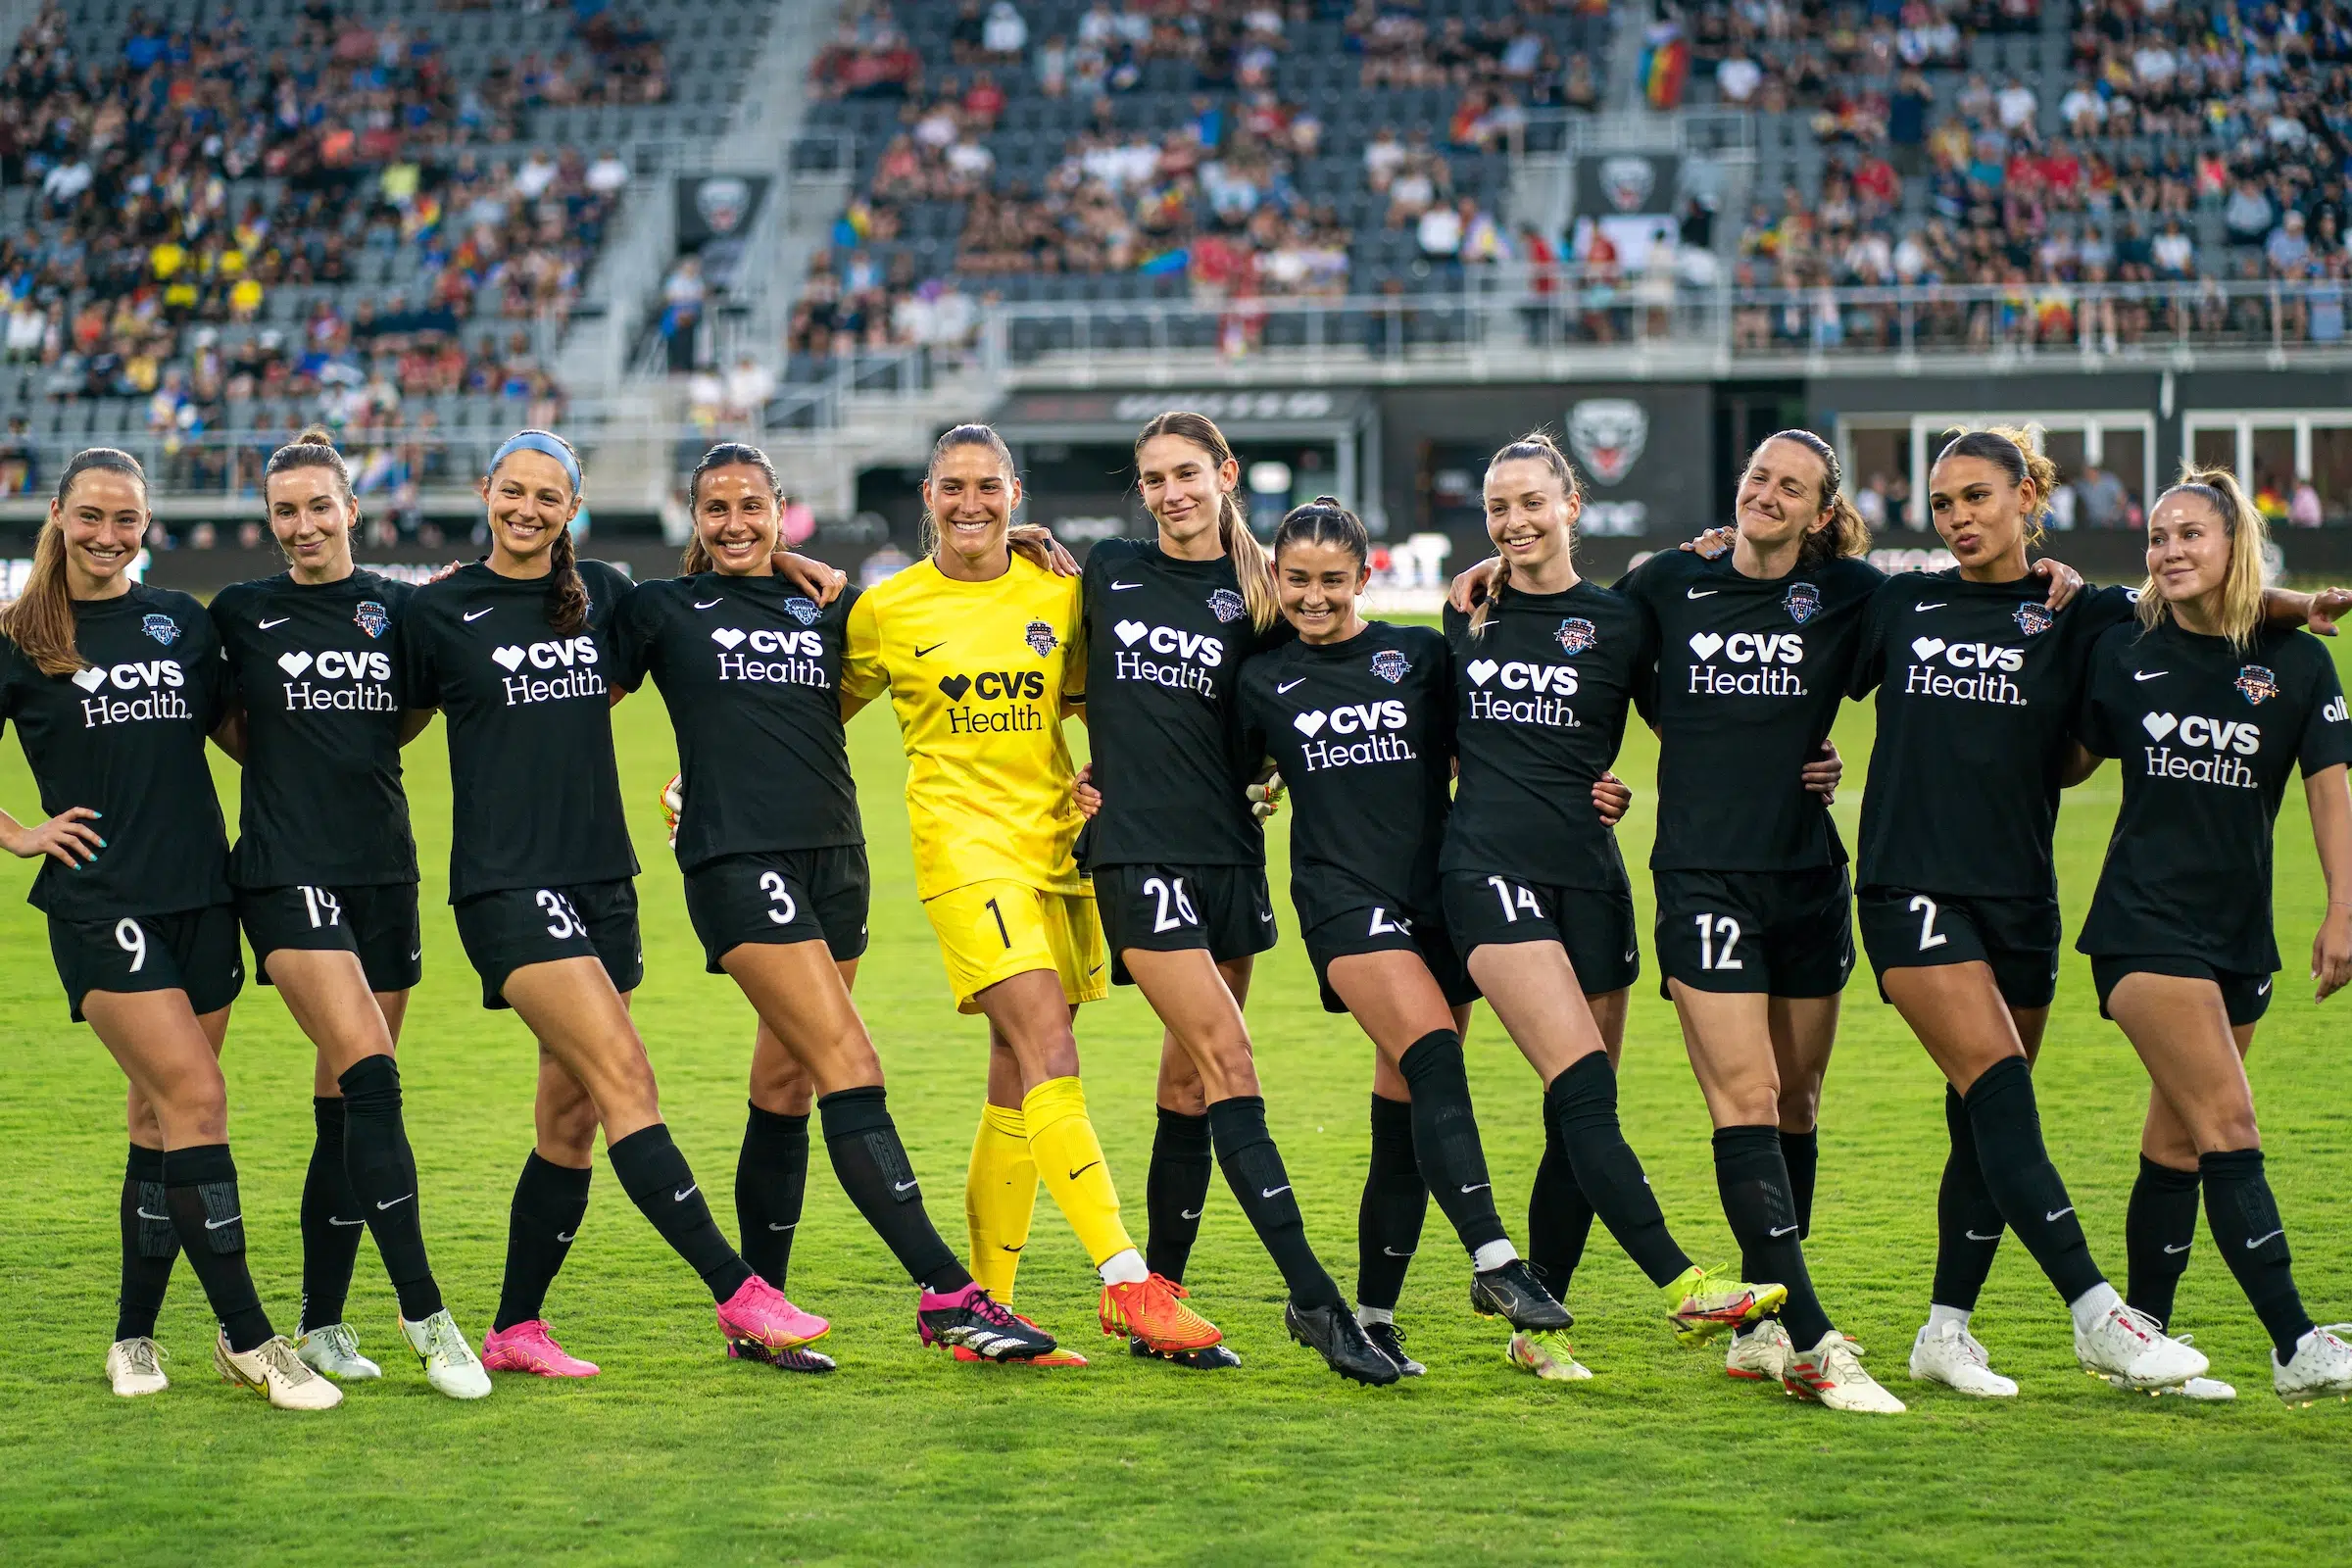 10 players in black uniforms and one in a yellow uniform line up with their arms around each other and outstretch their right legs with their toes pointed.